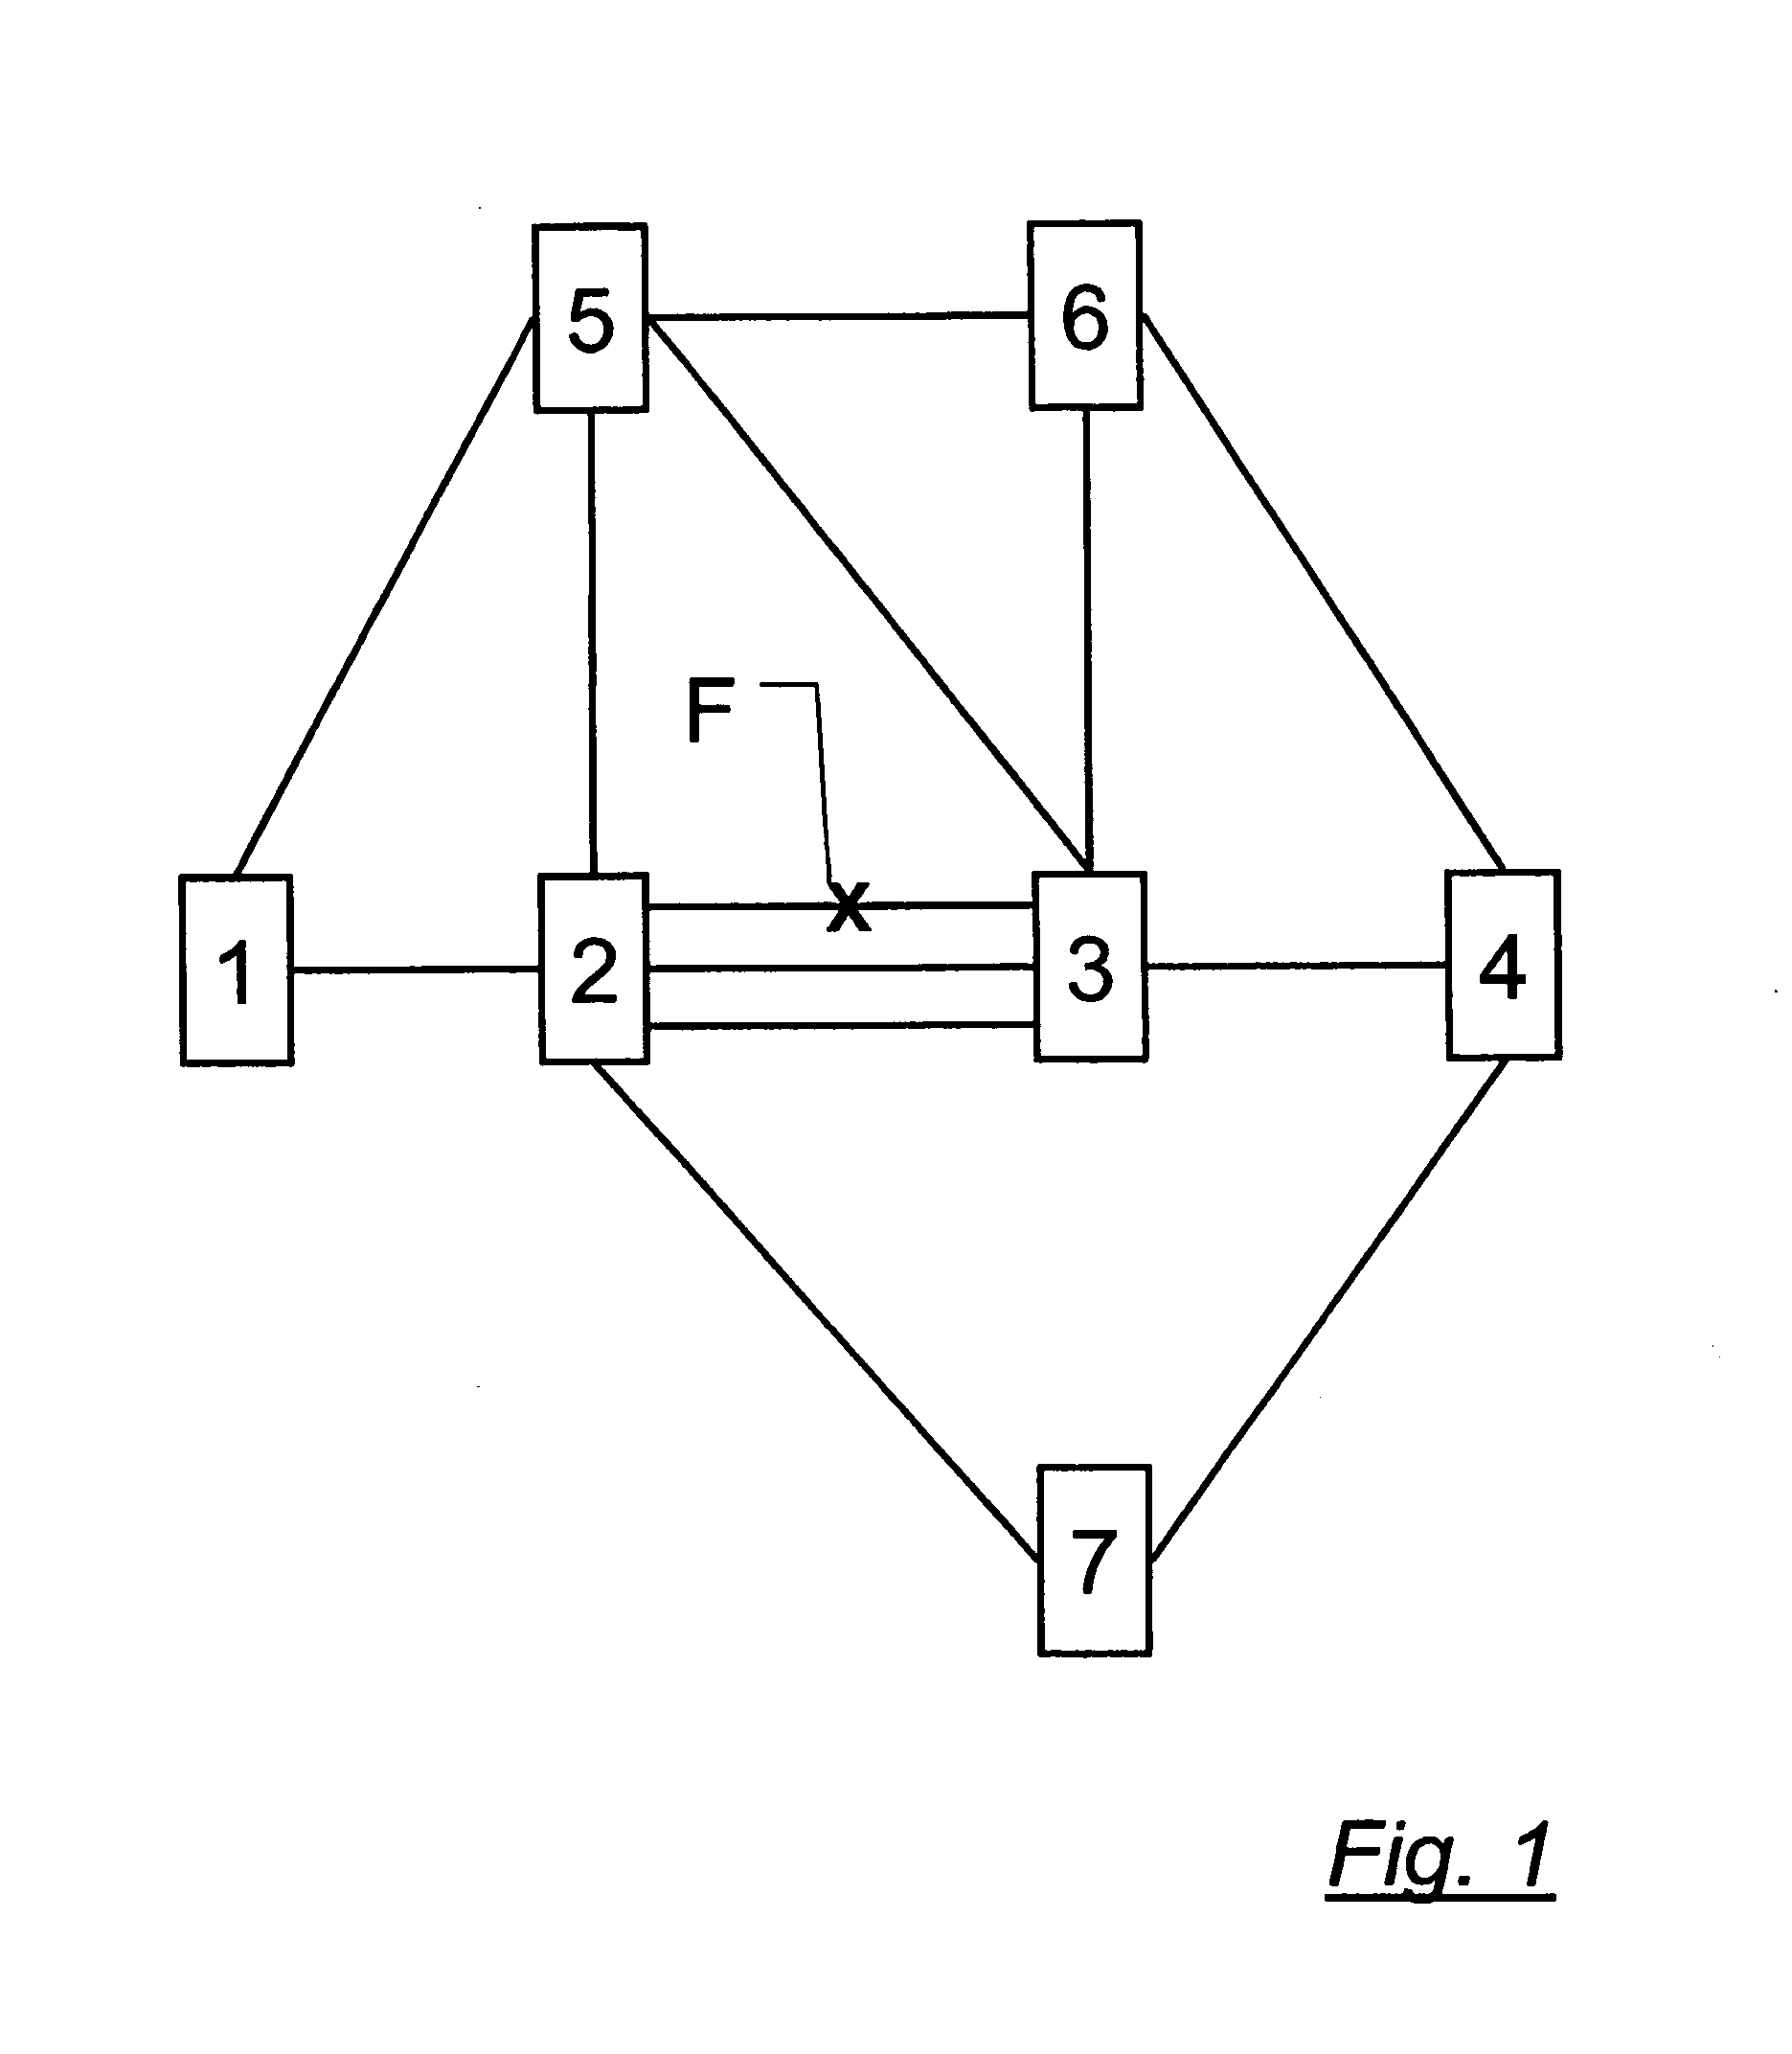 Method for restoring connections in a network